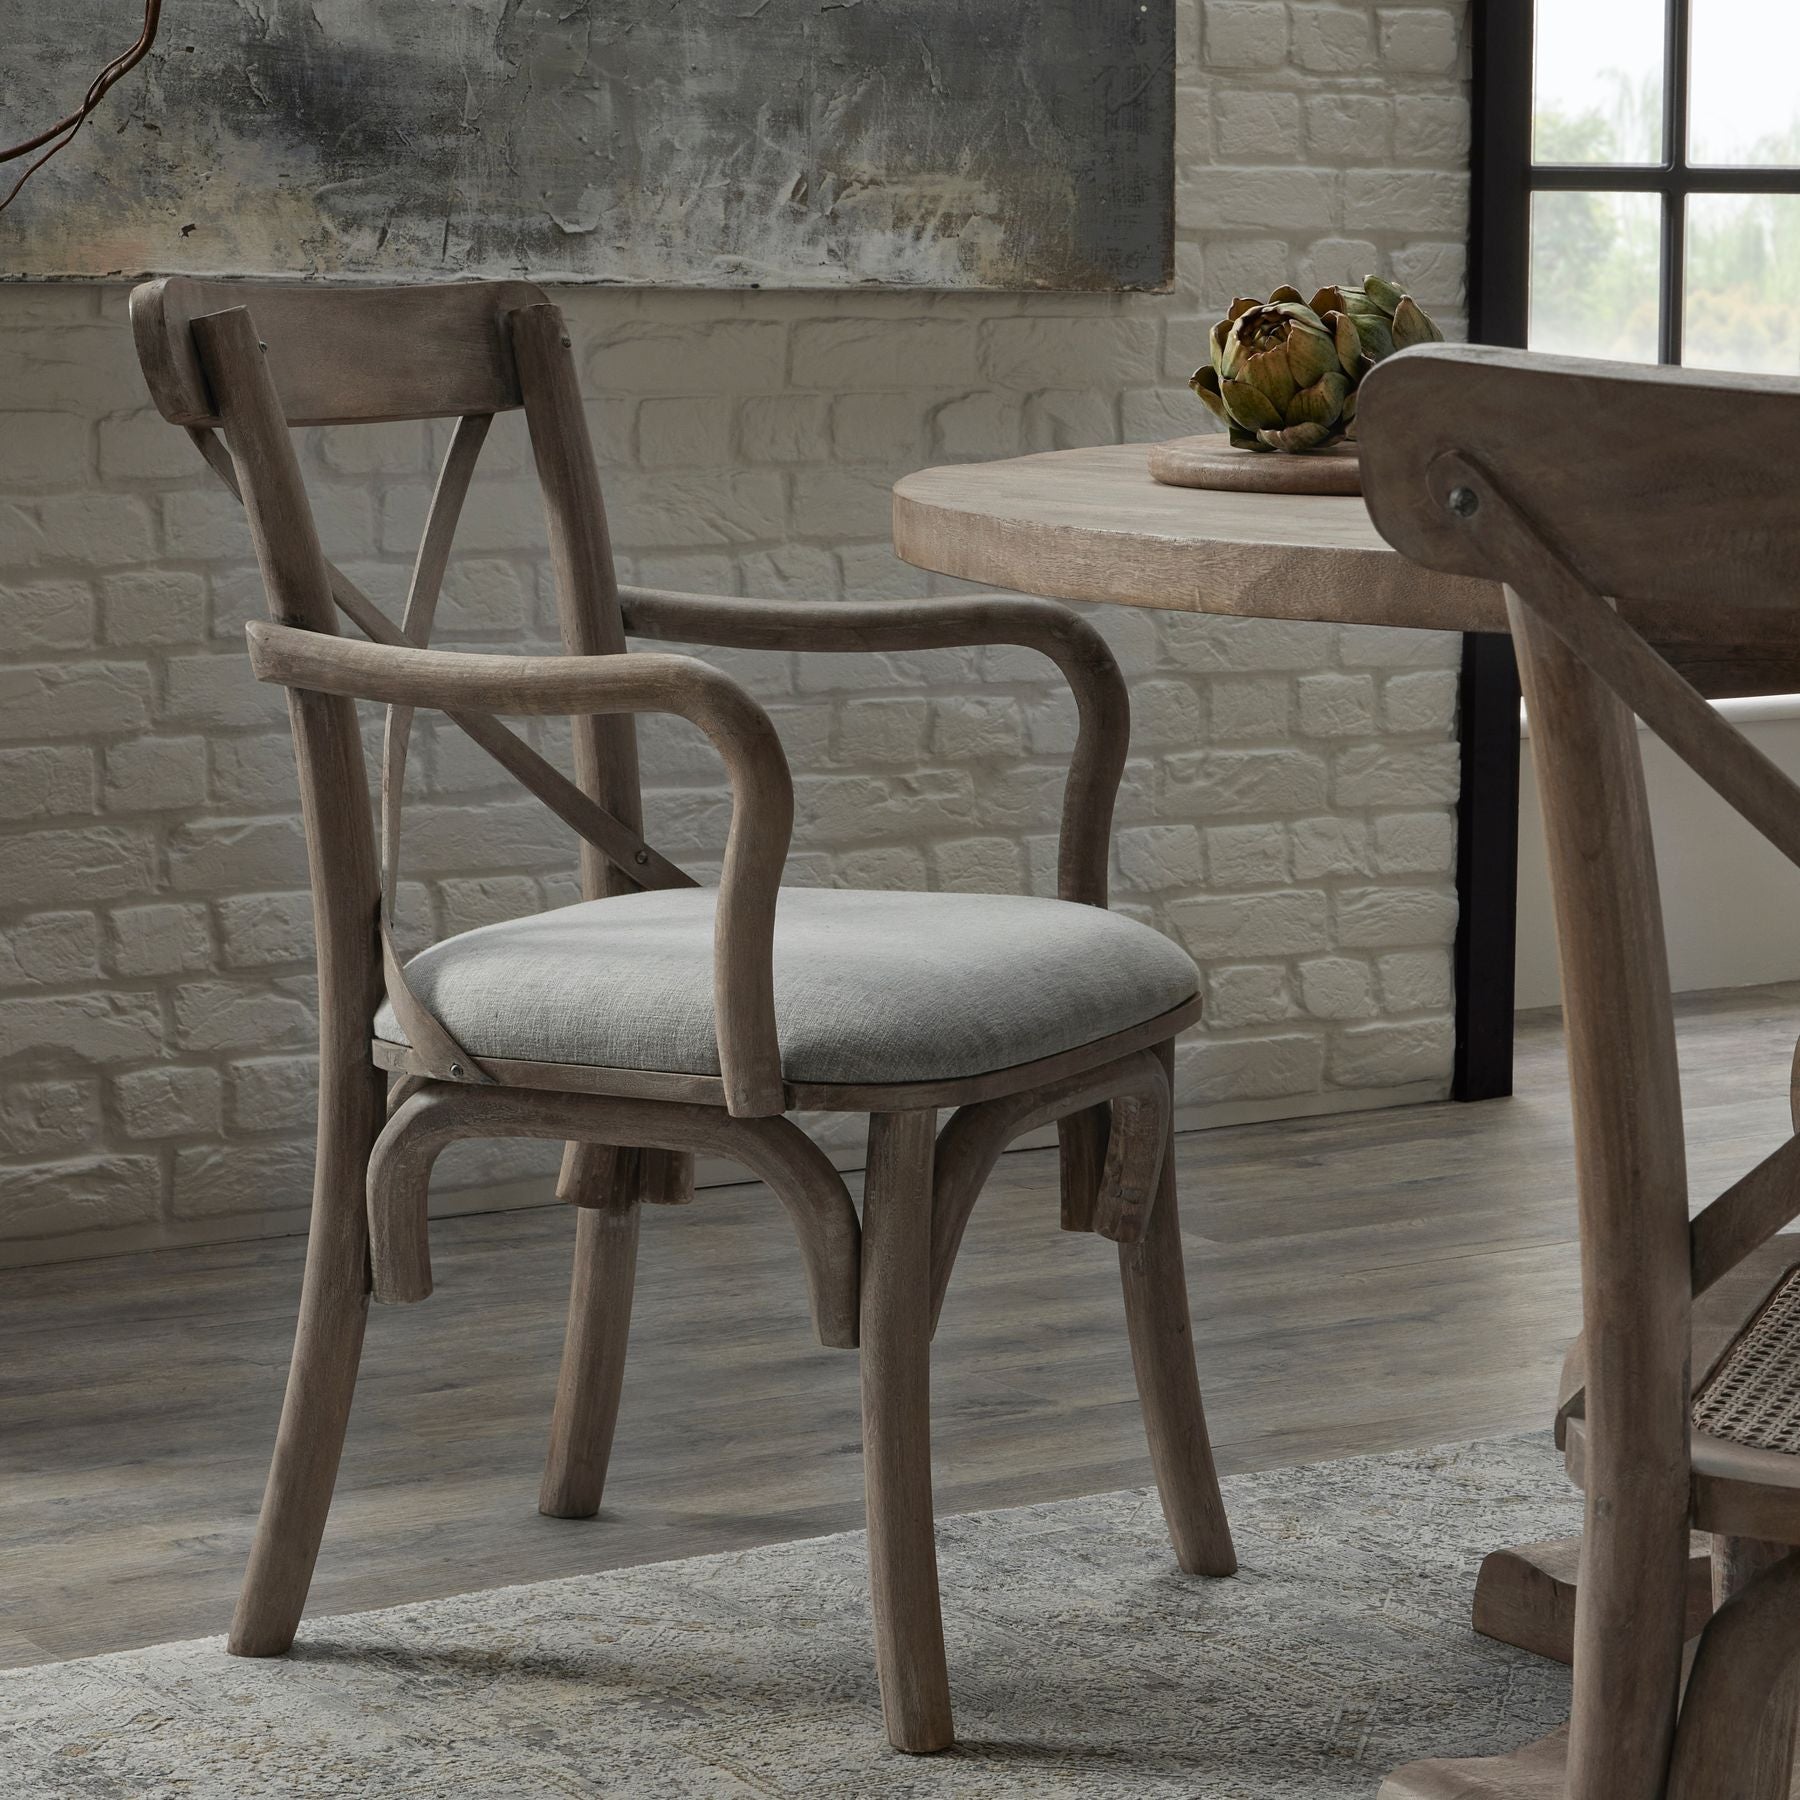 Copgrove Collection Cross Back Carver Chair With Fabric Seat